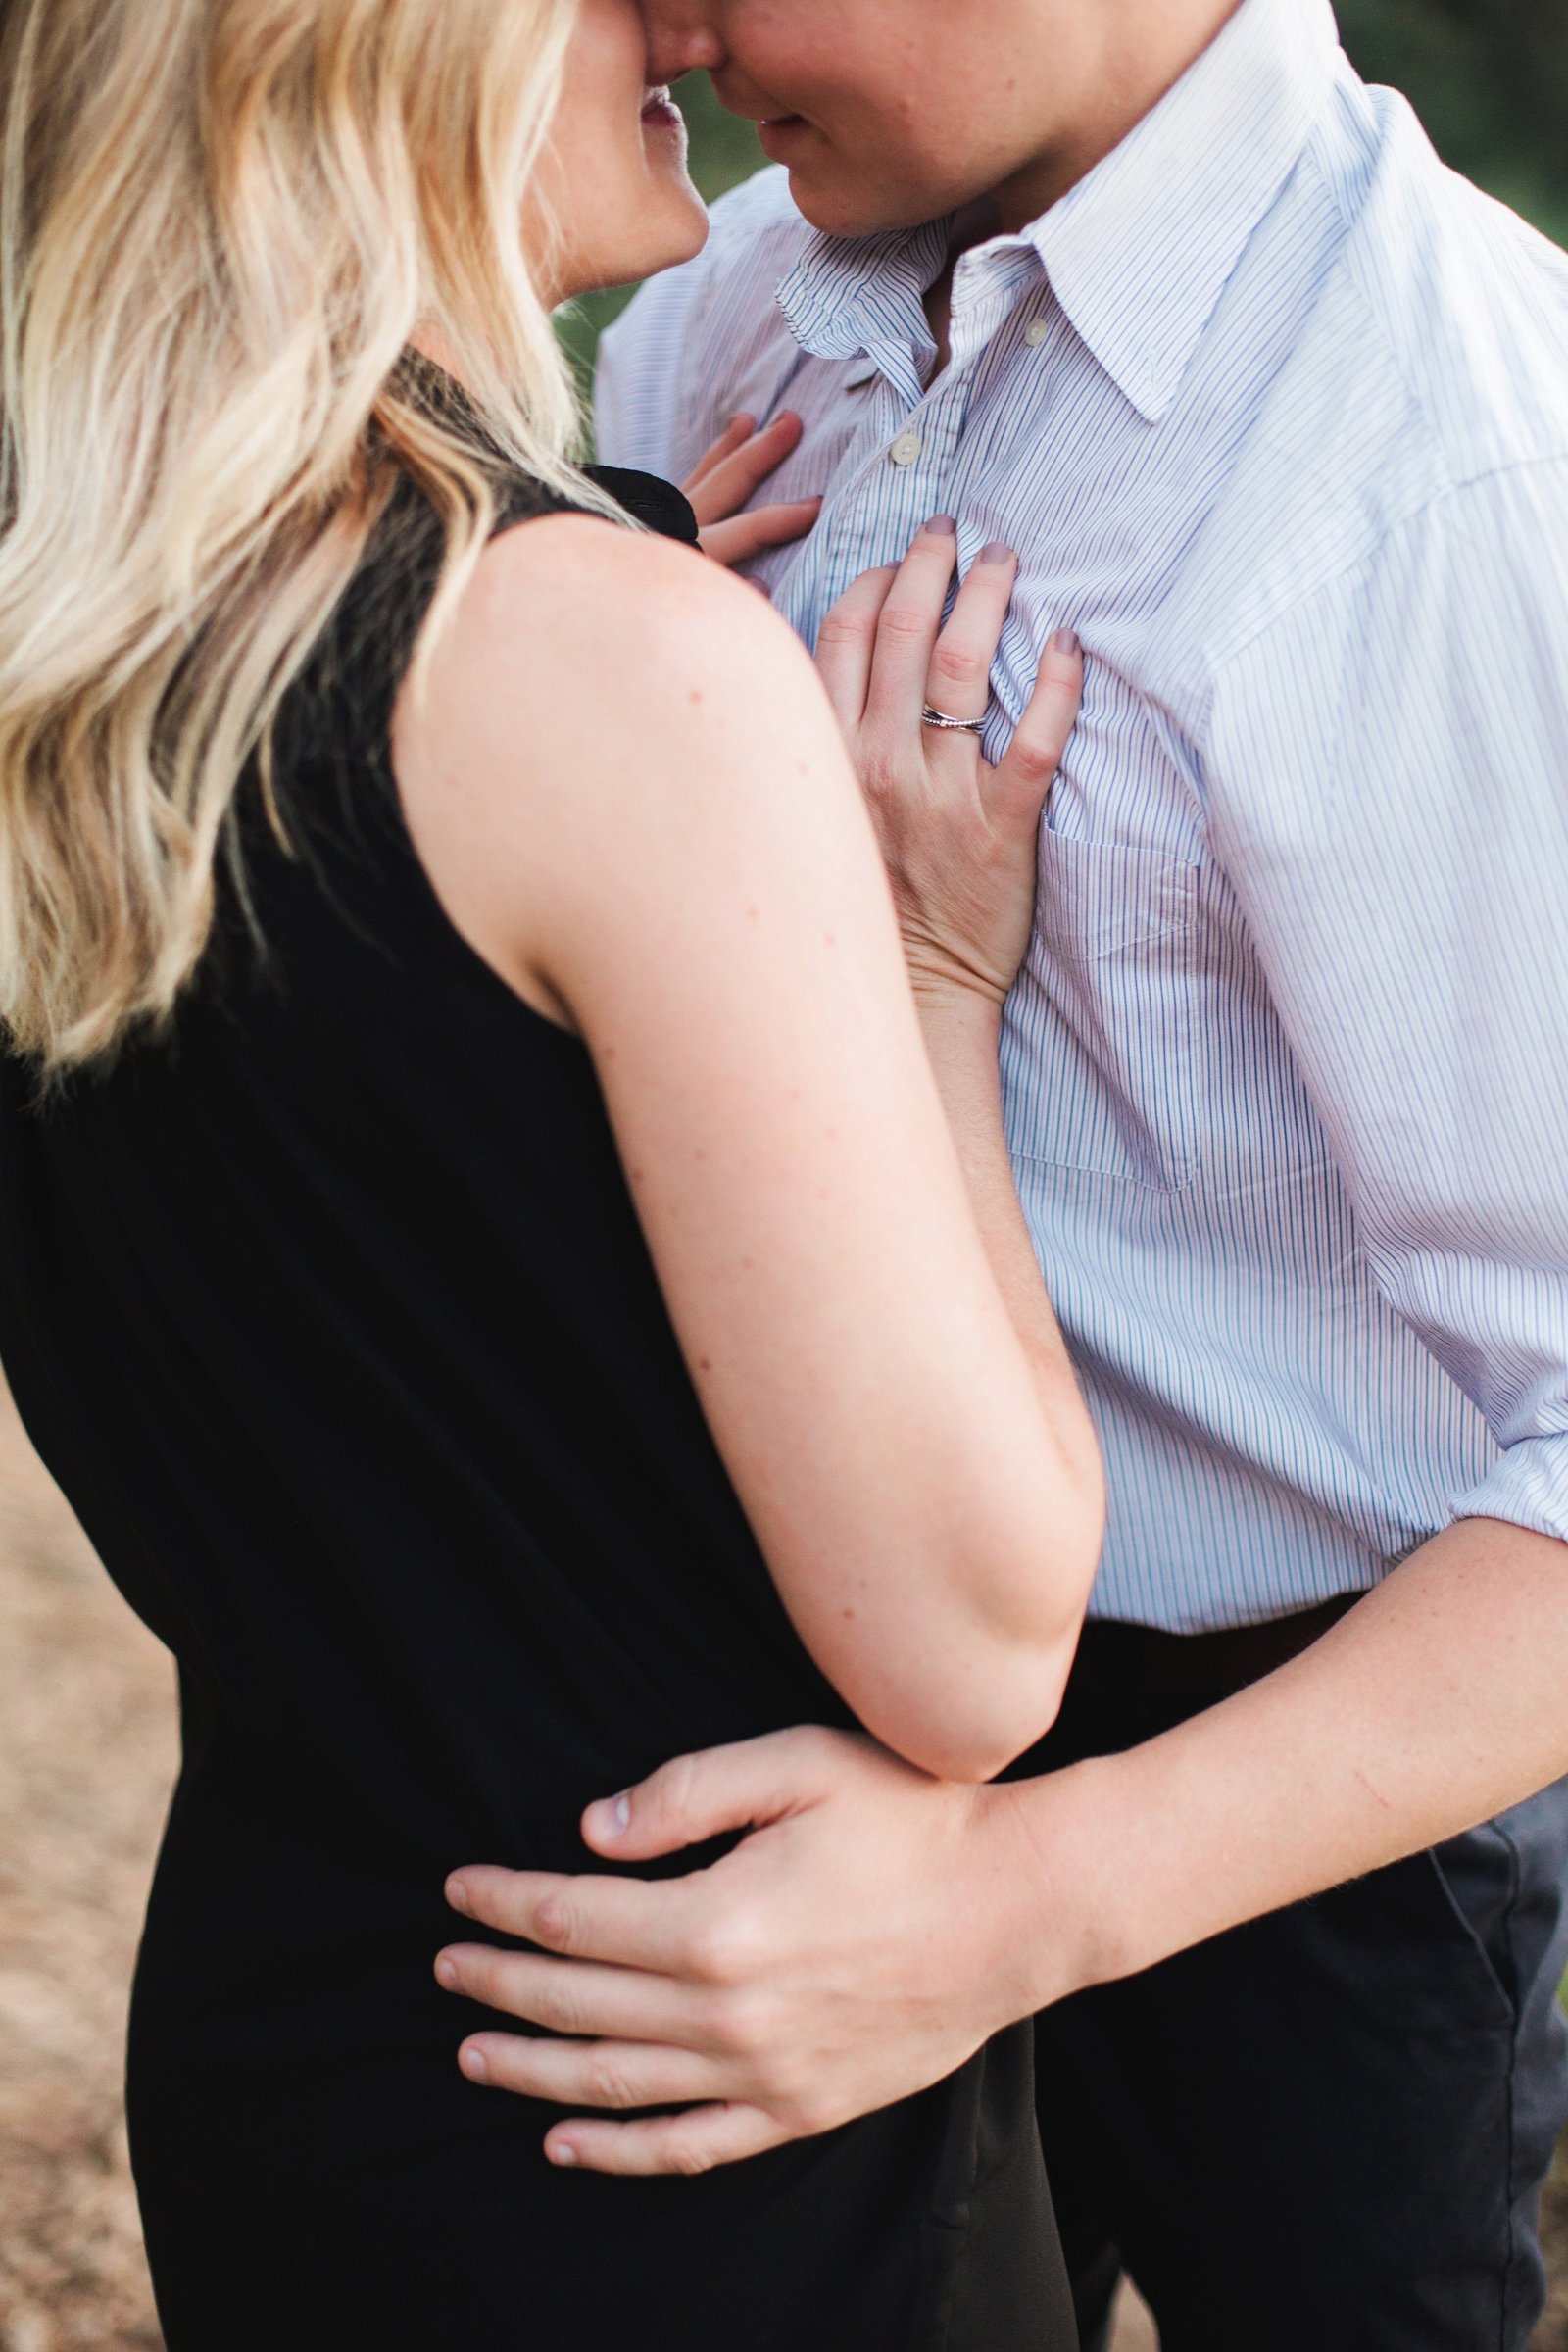 Engagements -Denver Lookout Mountain Engagement Session Golden Colorado Wedding Photographer Overlook City Lights Nature Outdoors Valley Light Couple (6)